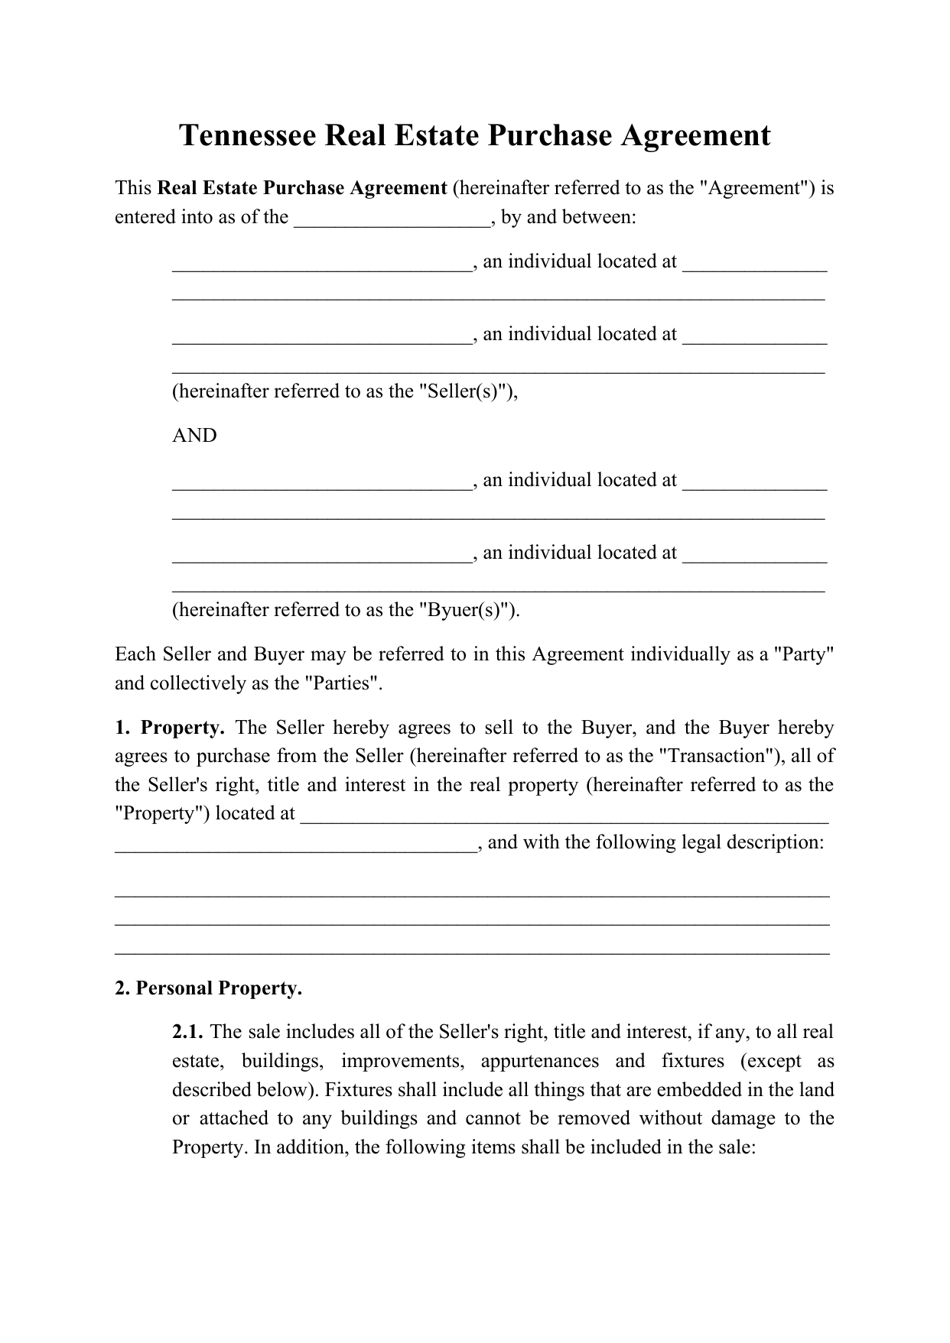 real estate independent contractor agreement template